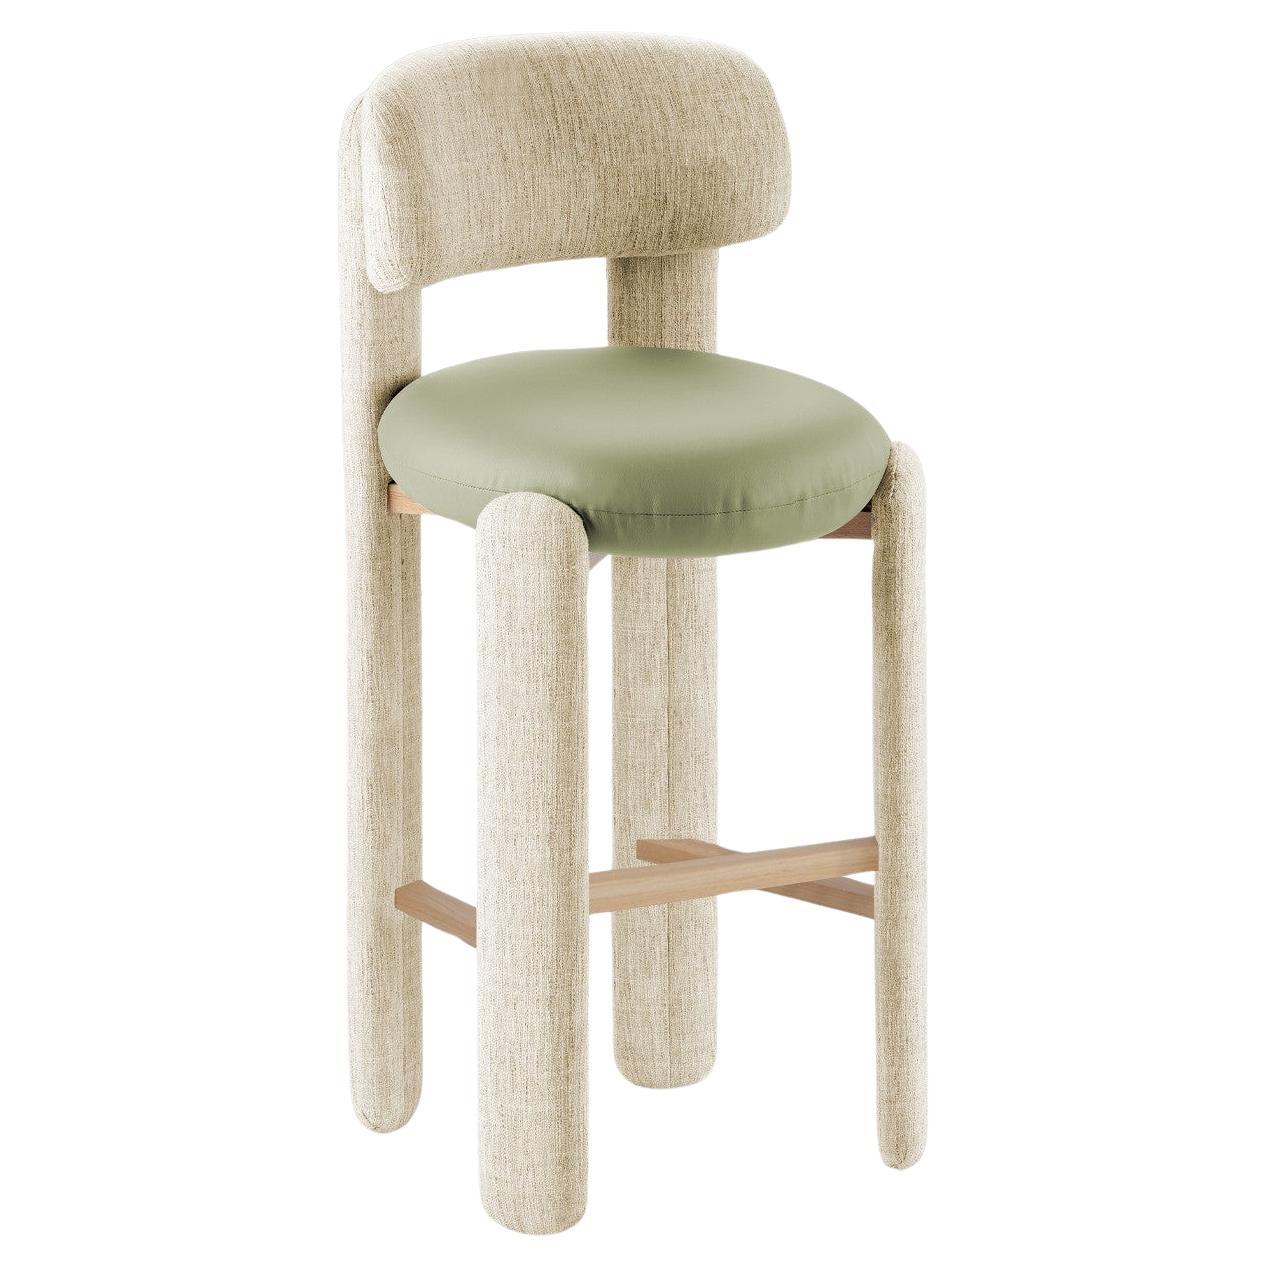 Handmade Contemporary Mambo Unlimited Ideas Choux Khaki seat Bar Chair For Sale